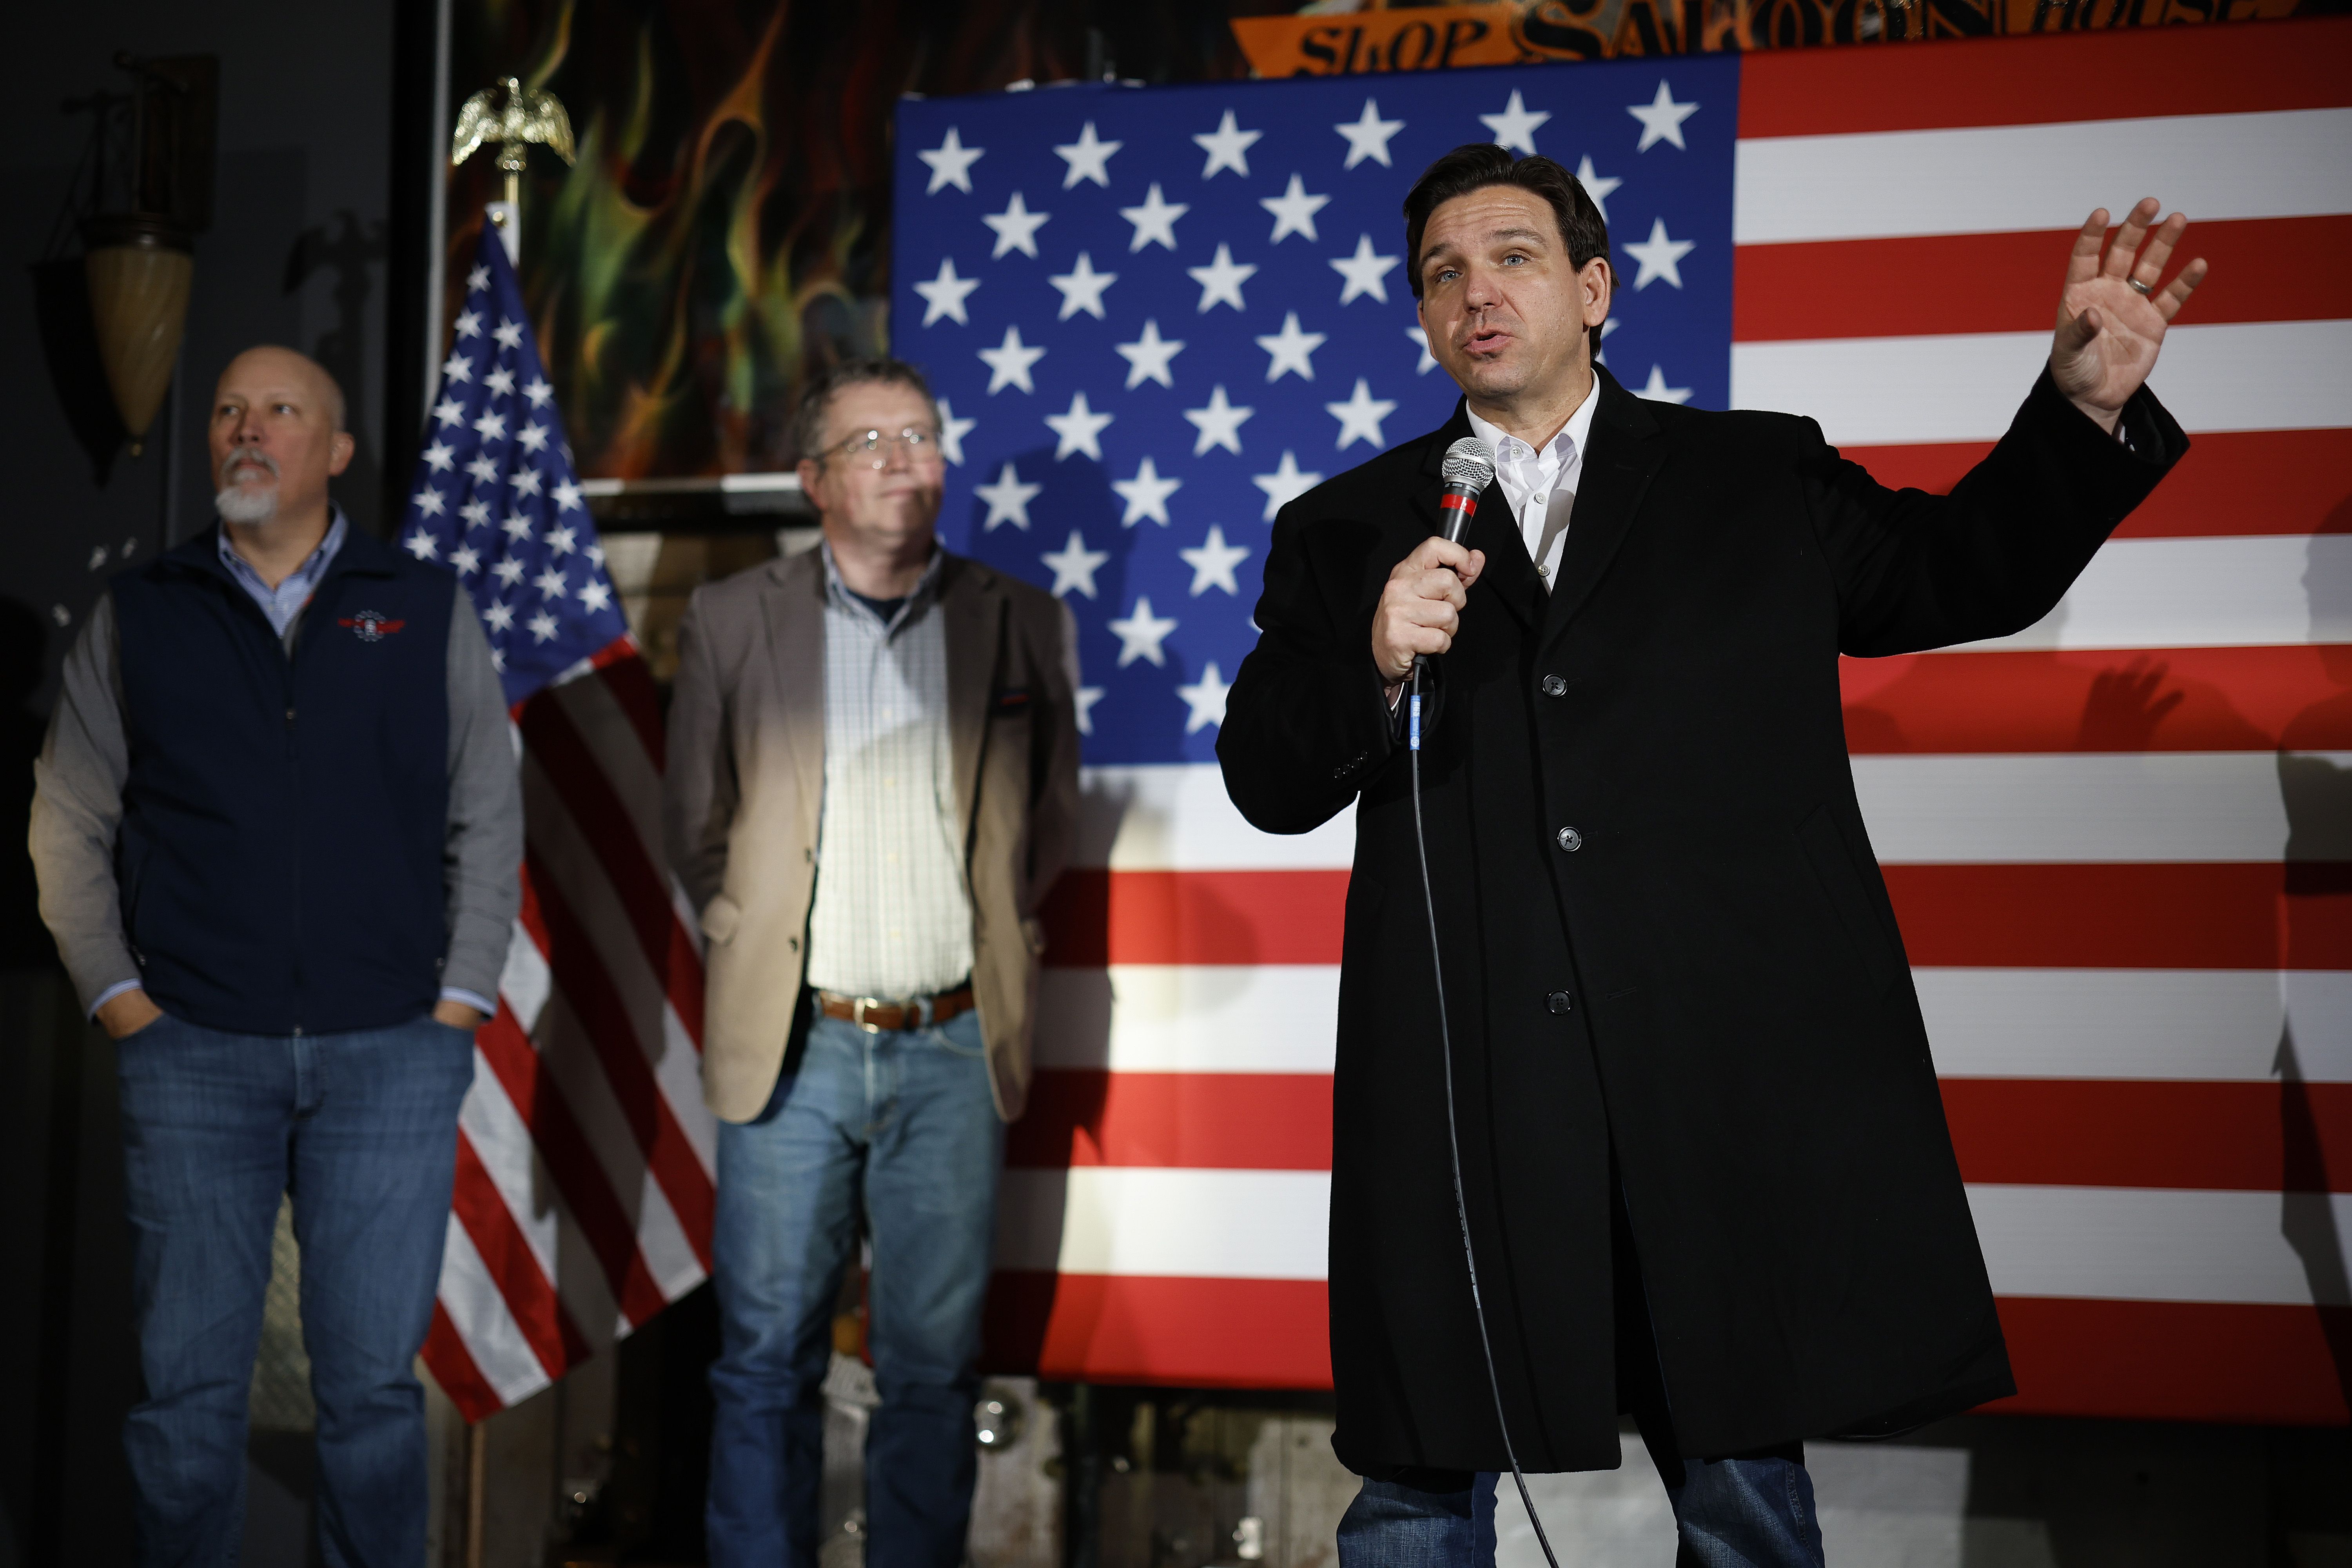 Republican presidential candidate Florida Gov. Ron DeSantis (R) is joined on stage by Rep. Chip Roy (R-TX) (L) and Rep. Thomas Massie (R-KY) (2nd-L) during a campaign event at the Chrome Horse Saloon one day before the Iowa caucuses.